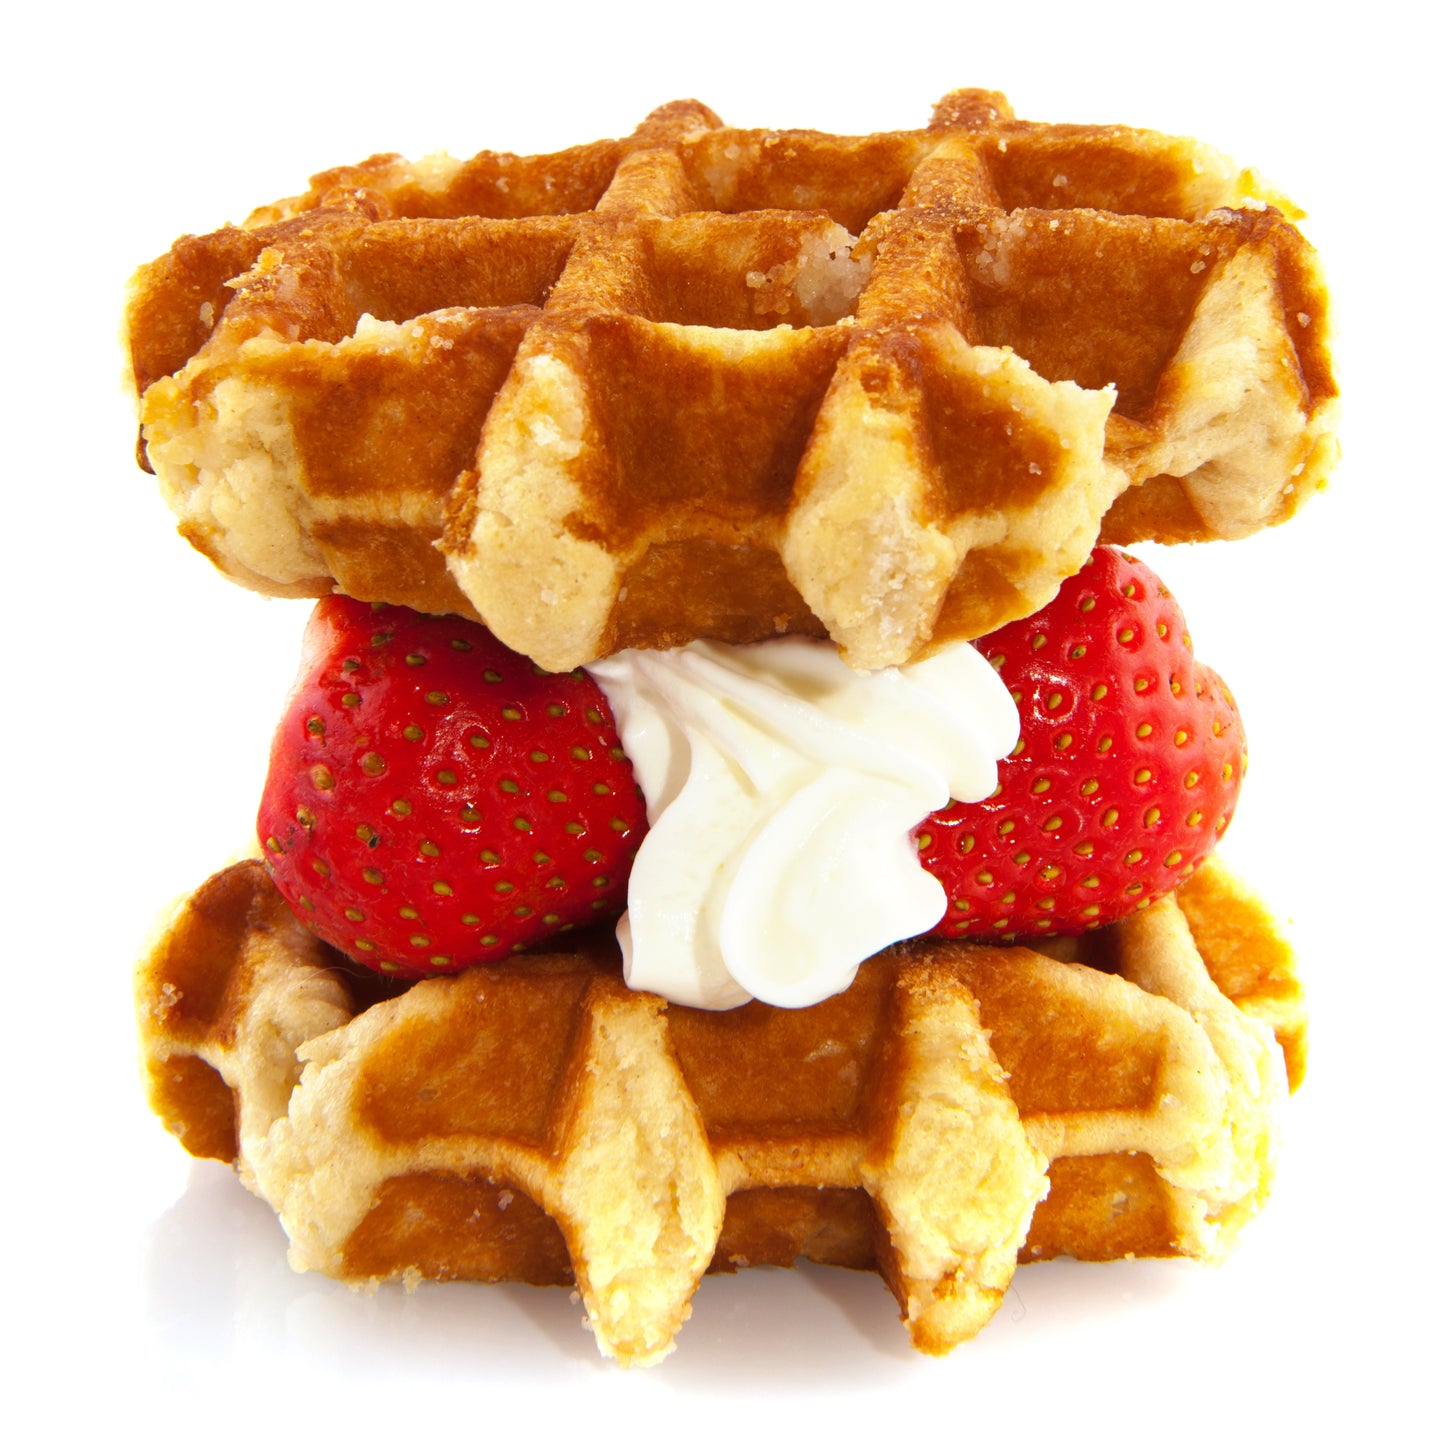 36 Count of Individually Wrapped (IW) Liege Style Sandwich Waffles (2 Pack) COMING SOON!!